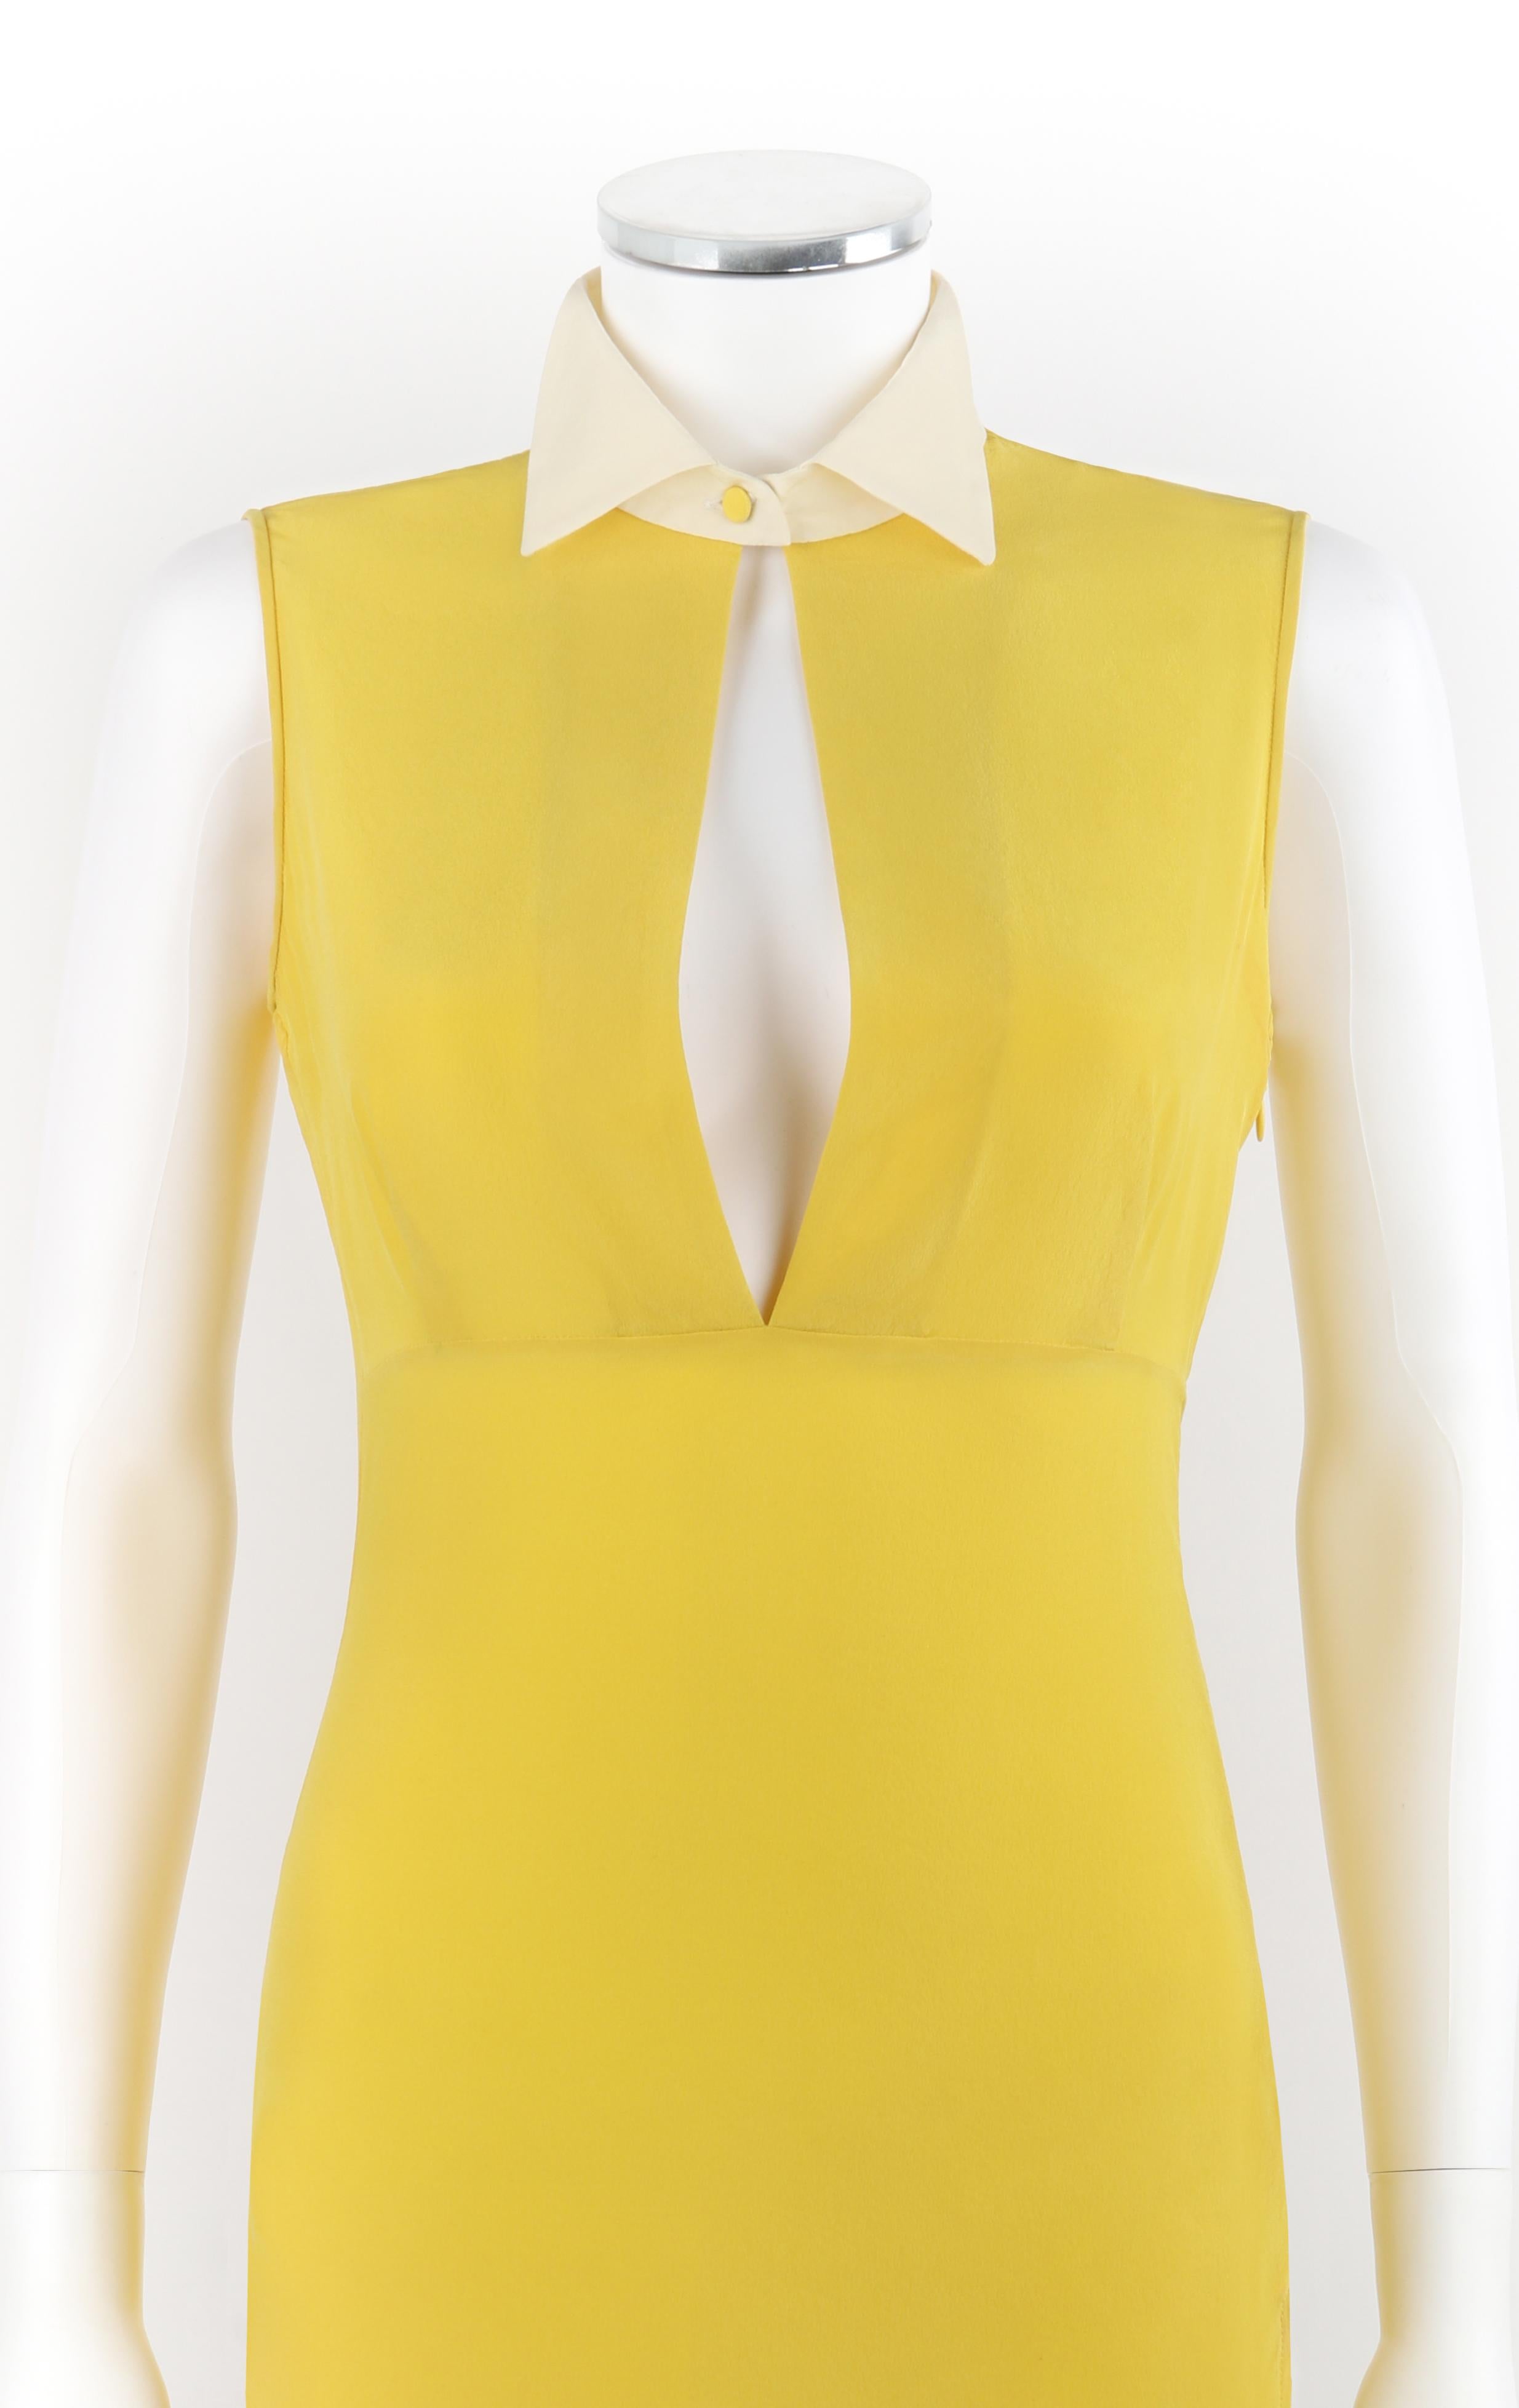 ALEXANDER McQUEEN c.2010 Yellow White Chiffon Keyhole Double Slit Mini Dress In Good Condition For Sale In Thiensville, WI